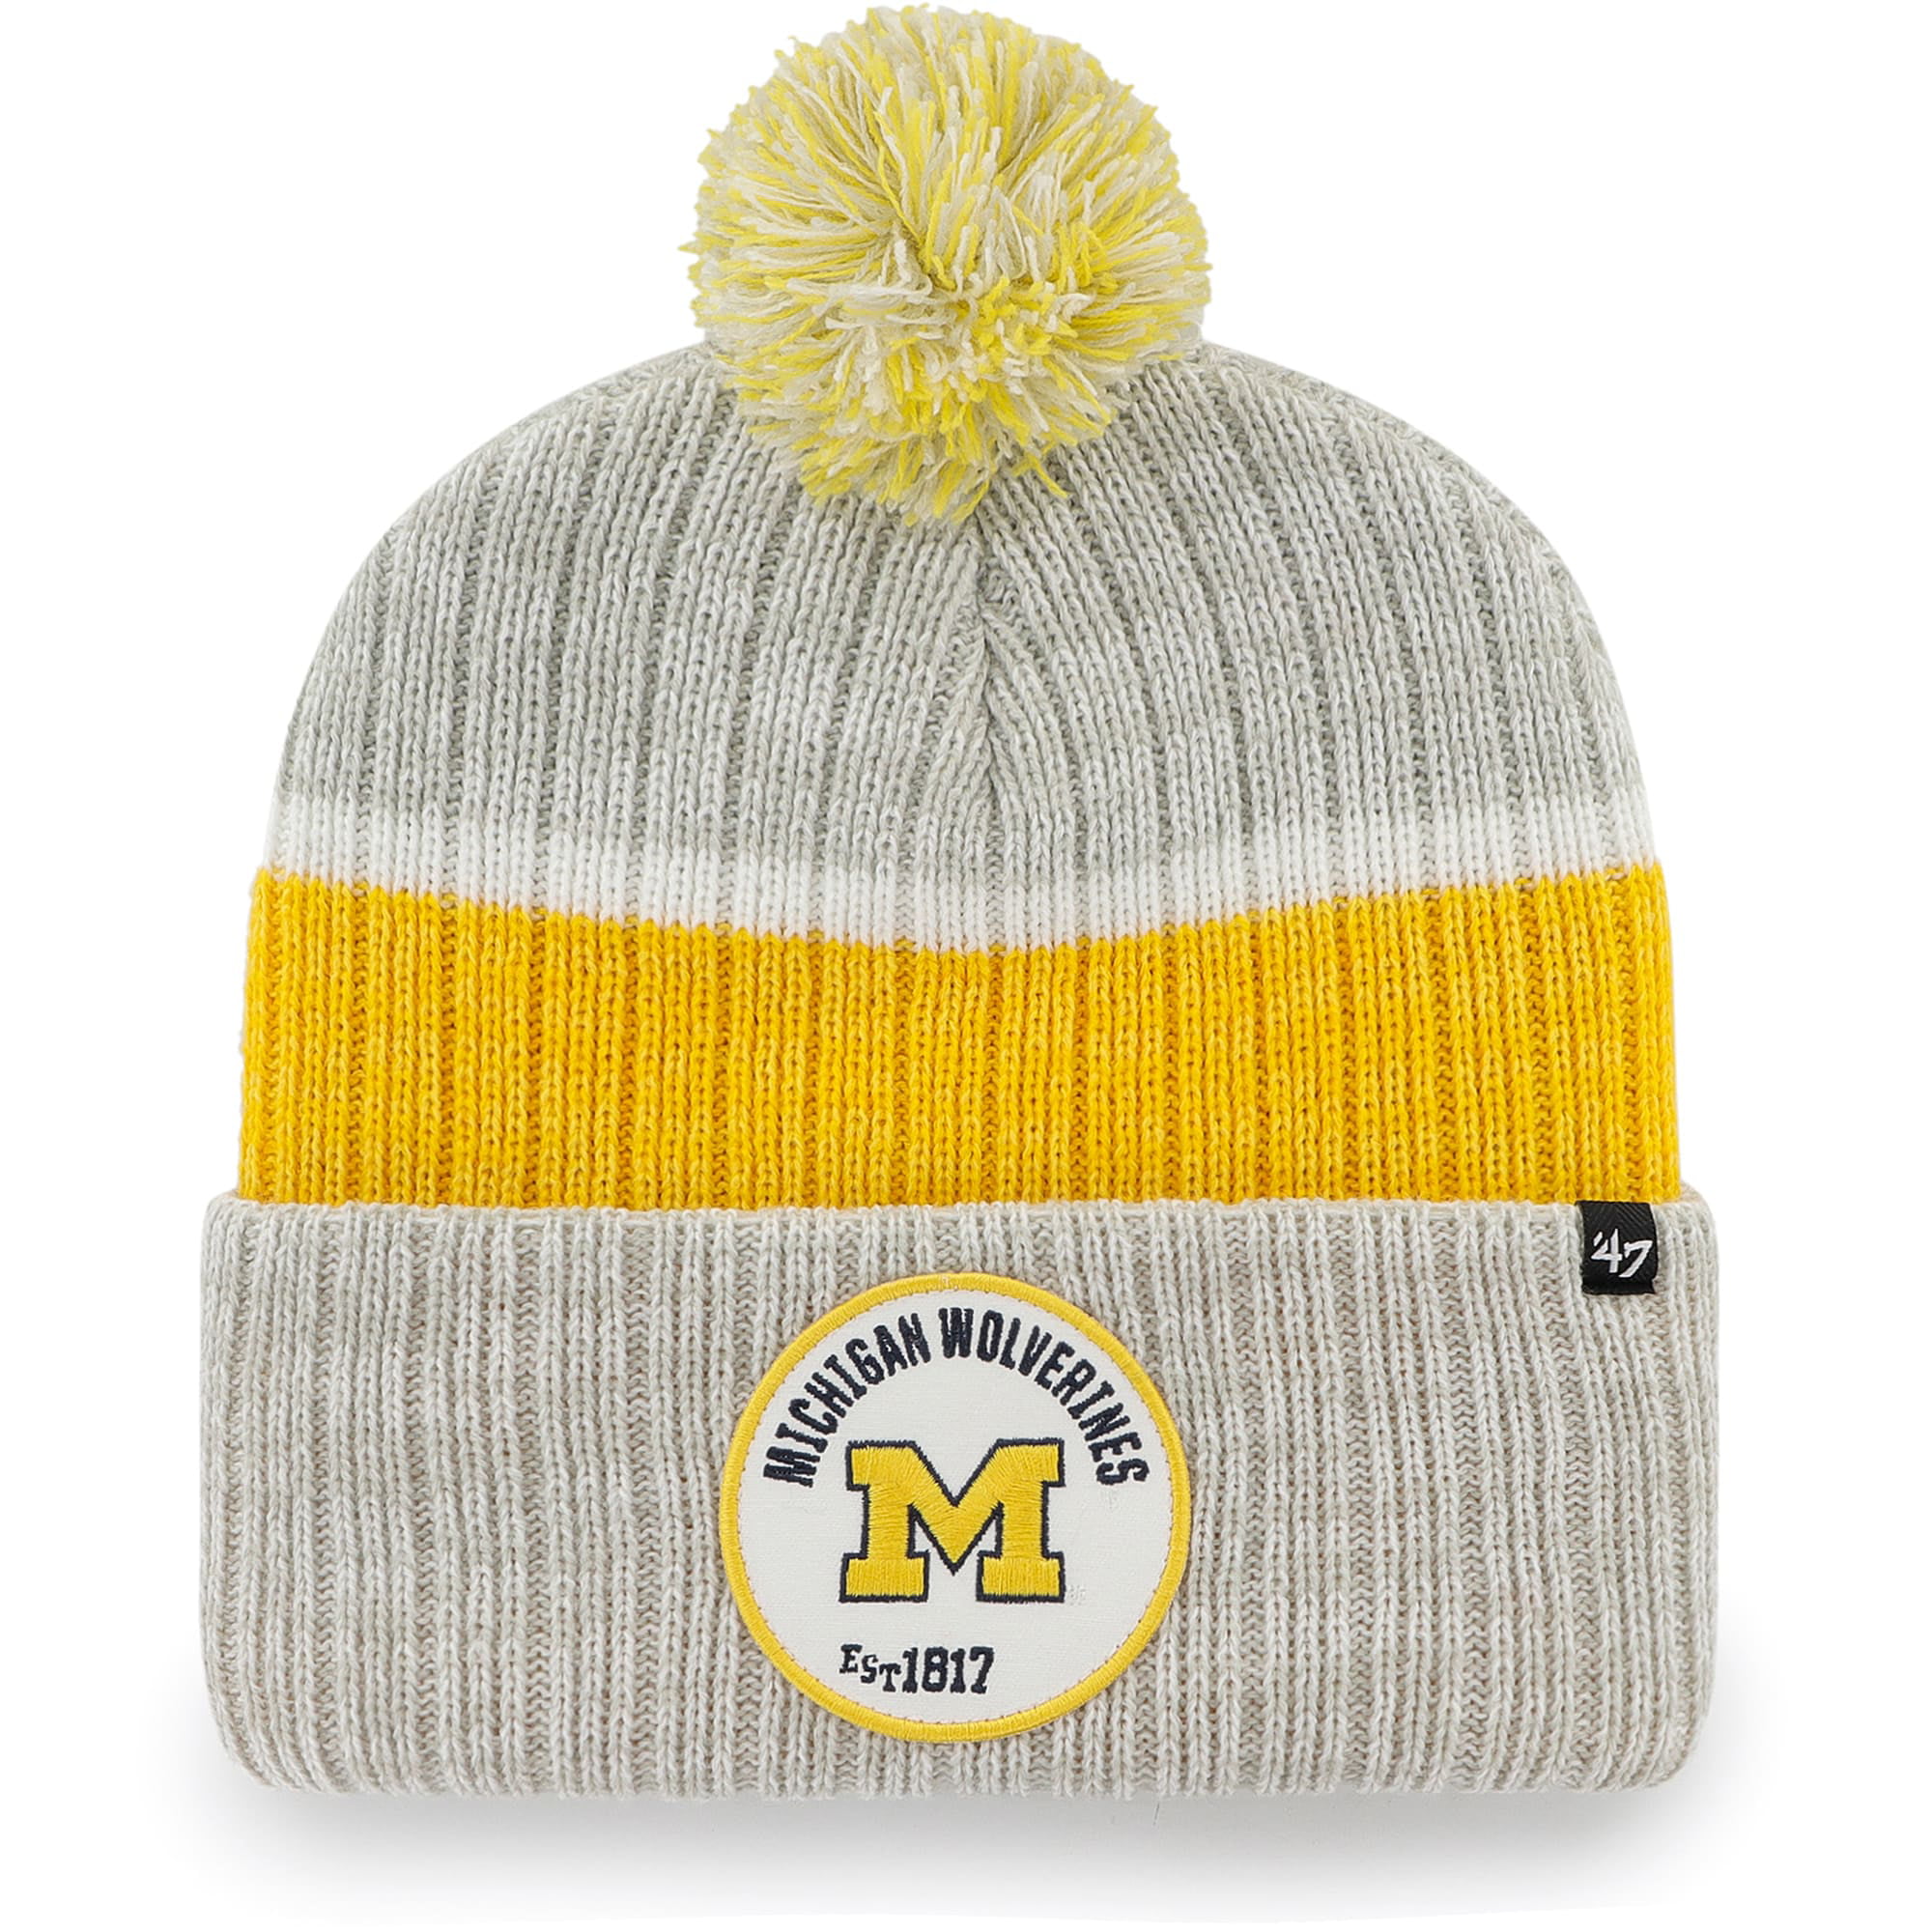 NCAA Cuffed Winter Knit Toque Cap '47 Michigan Wolverines Navy Blue Cuff Holcomb Beanie Hat with POM 